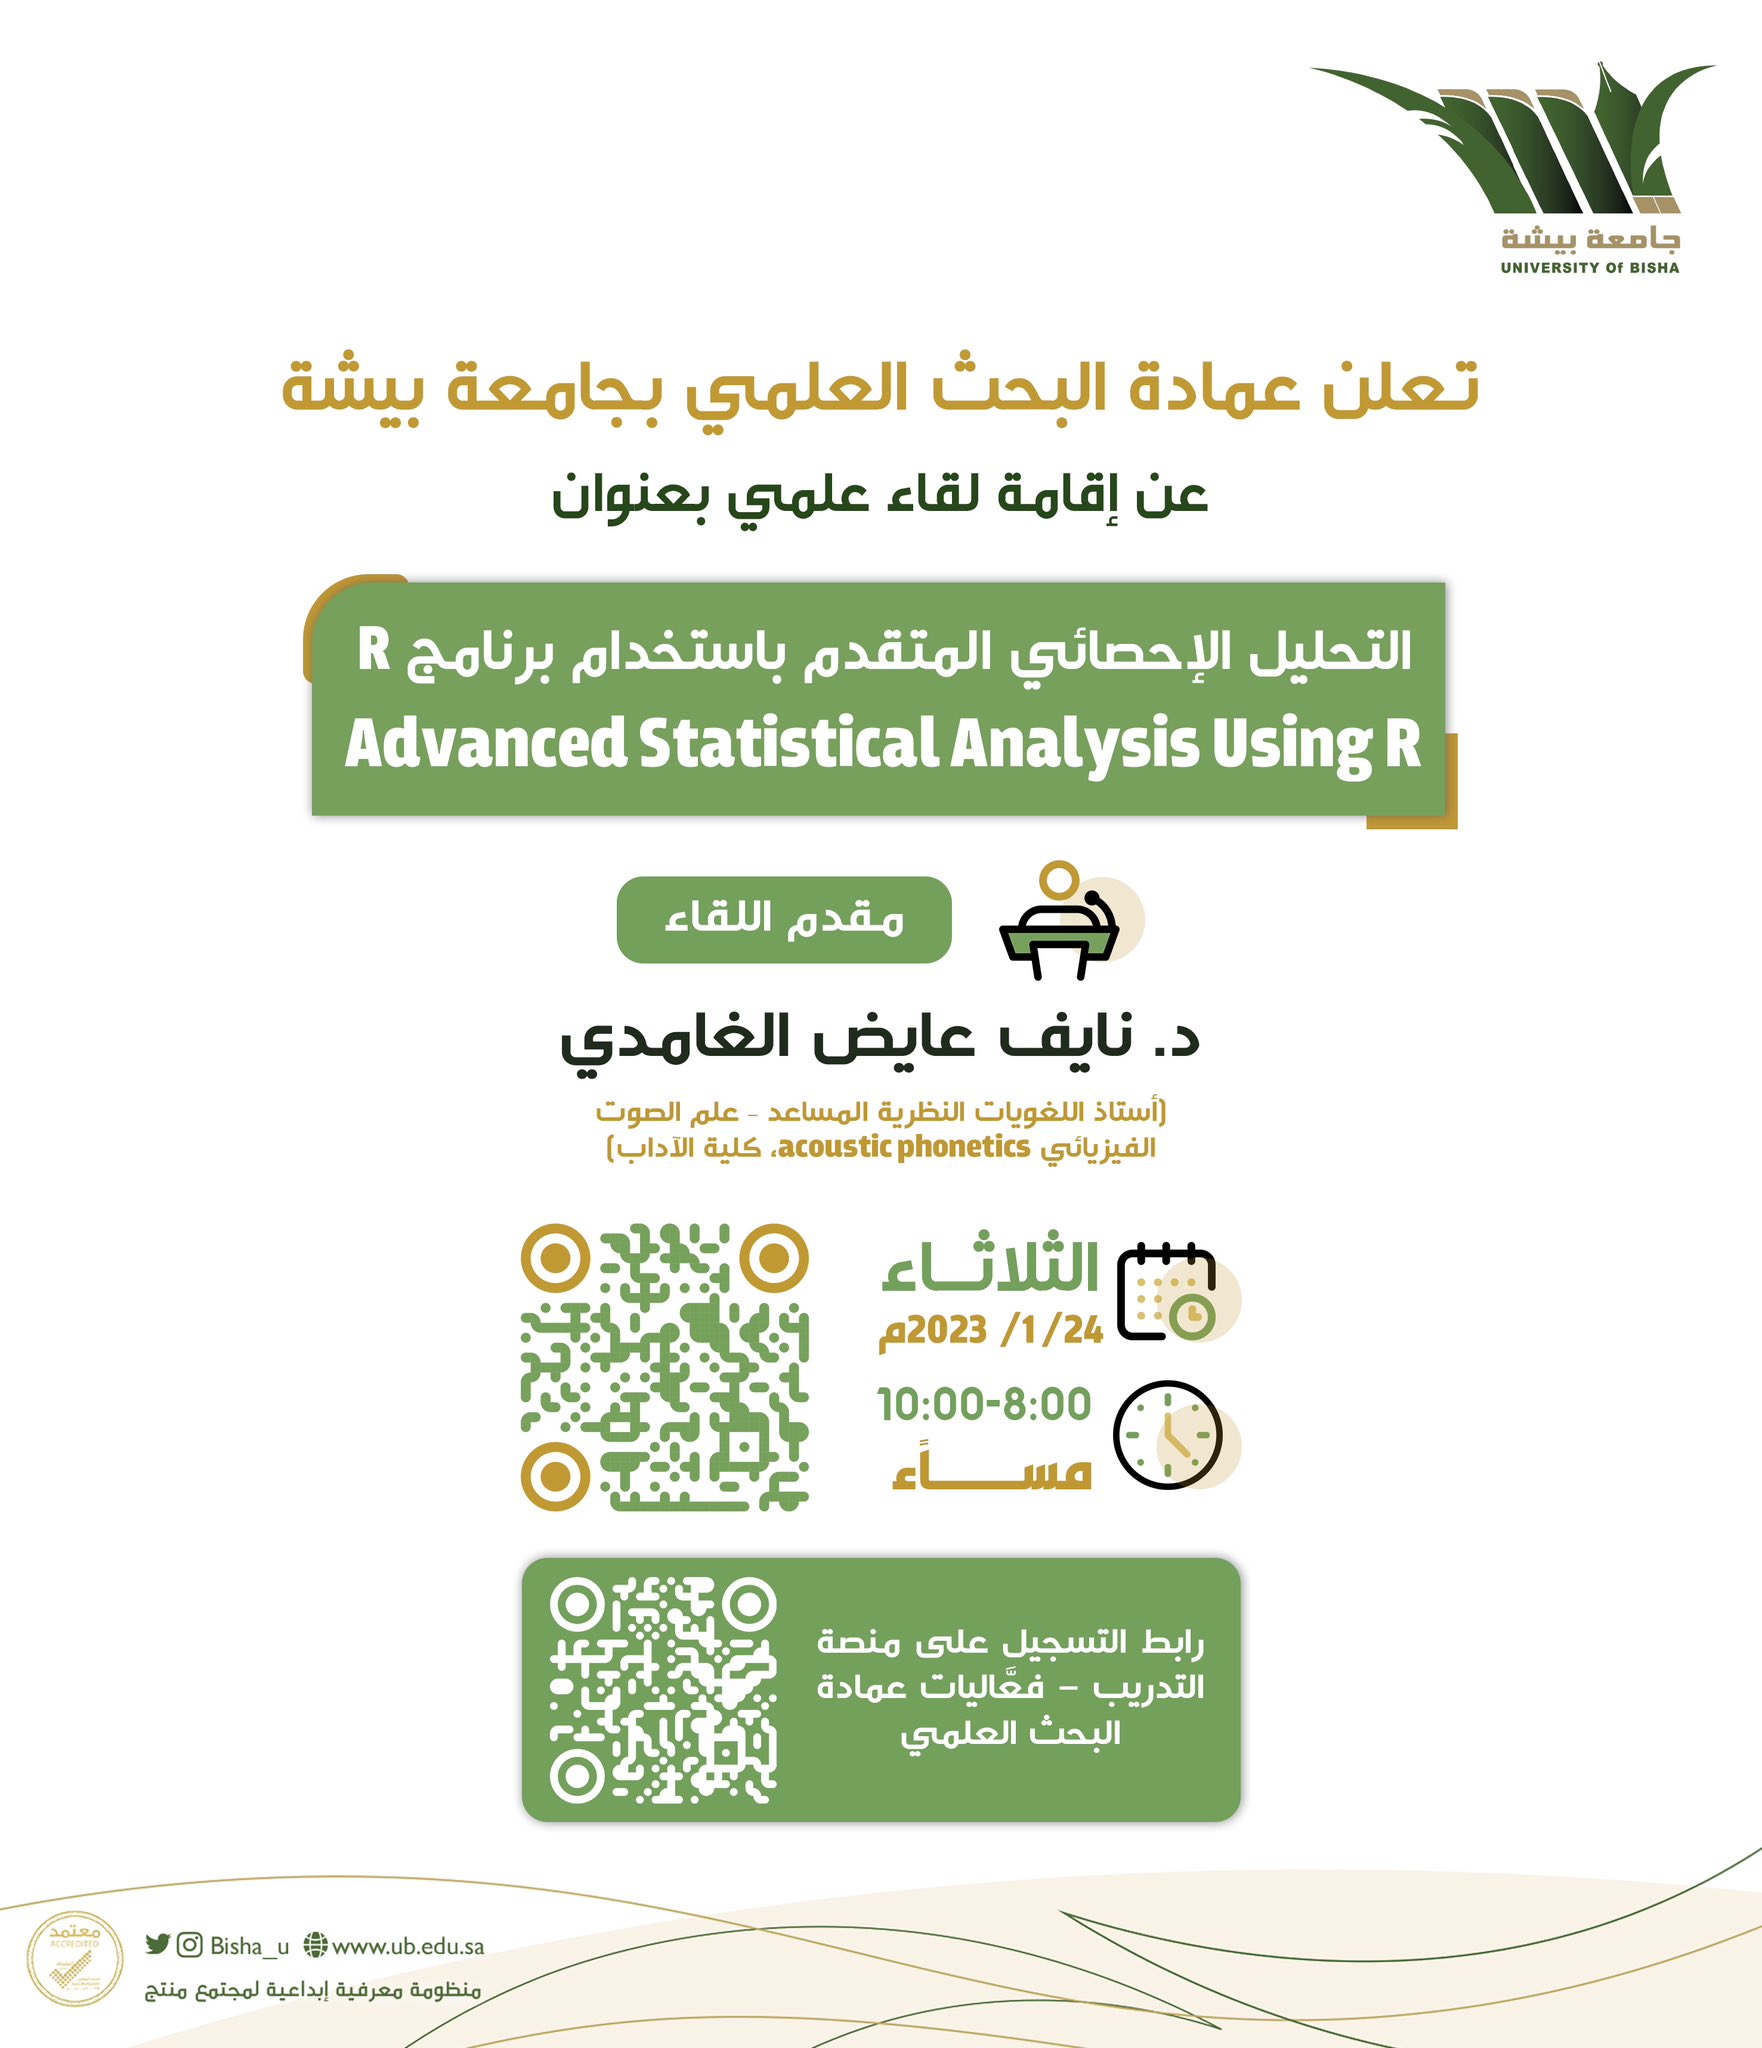 The Deanship of Scientific Research announces a Scientific Meeting entitled: Advanced Statistical Analysis Using R